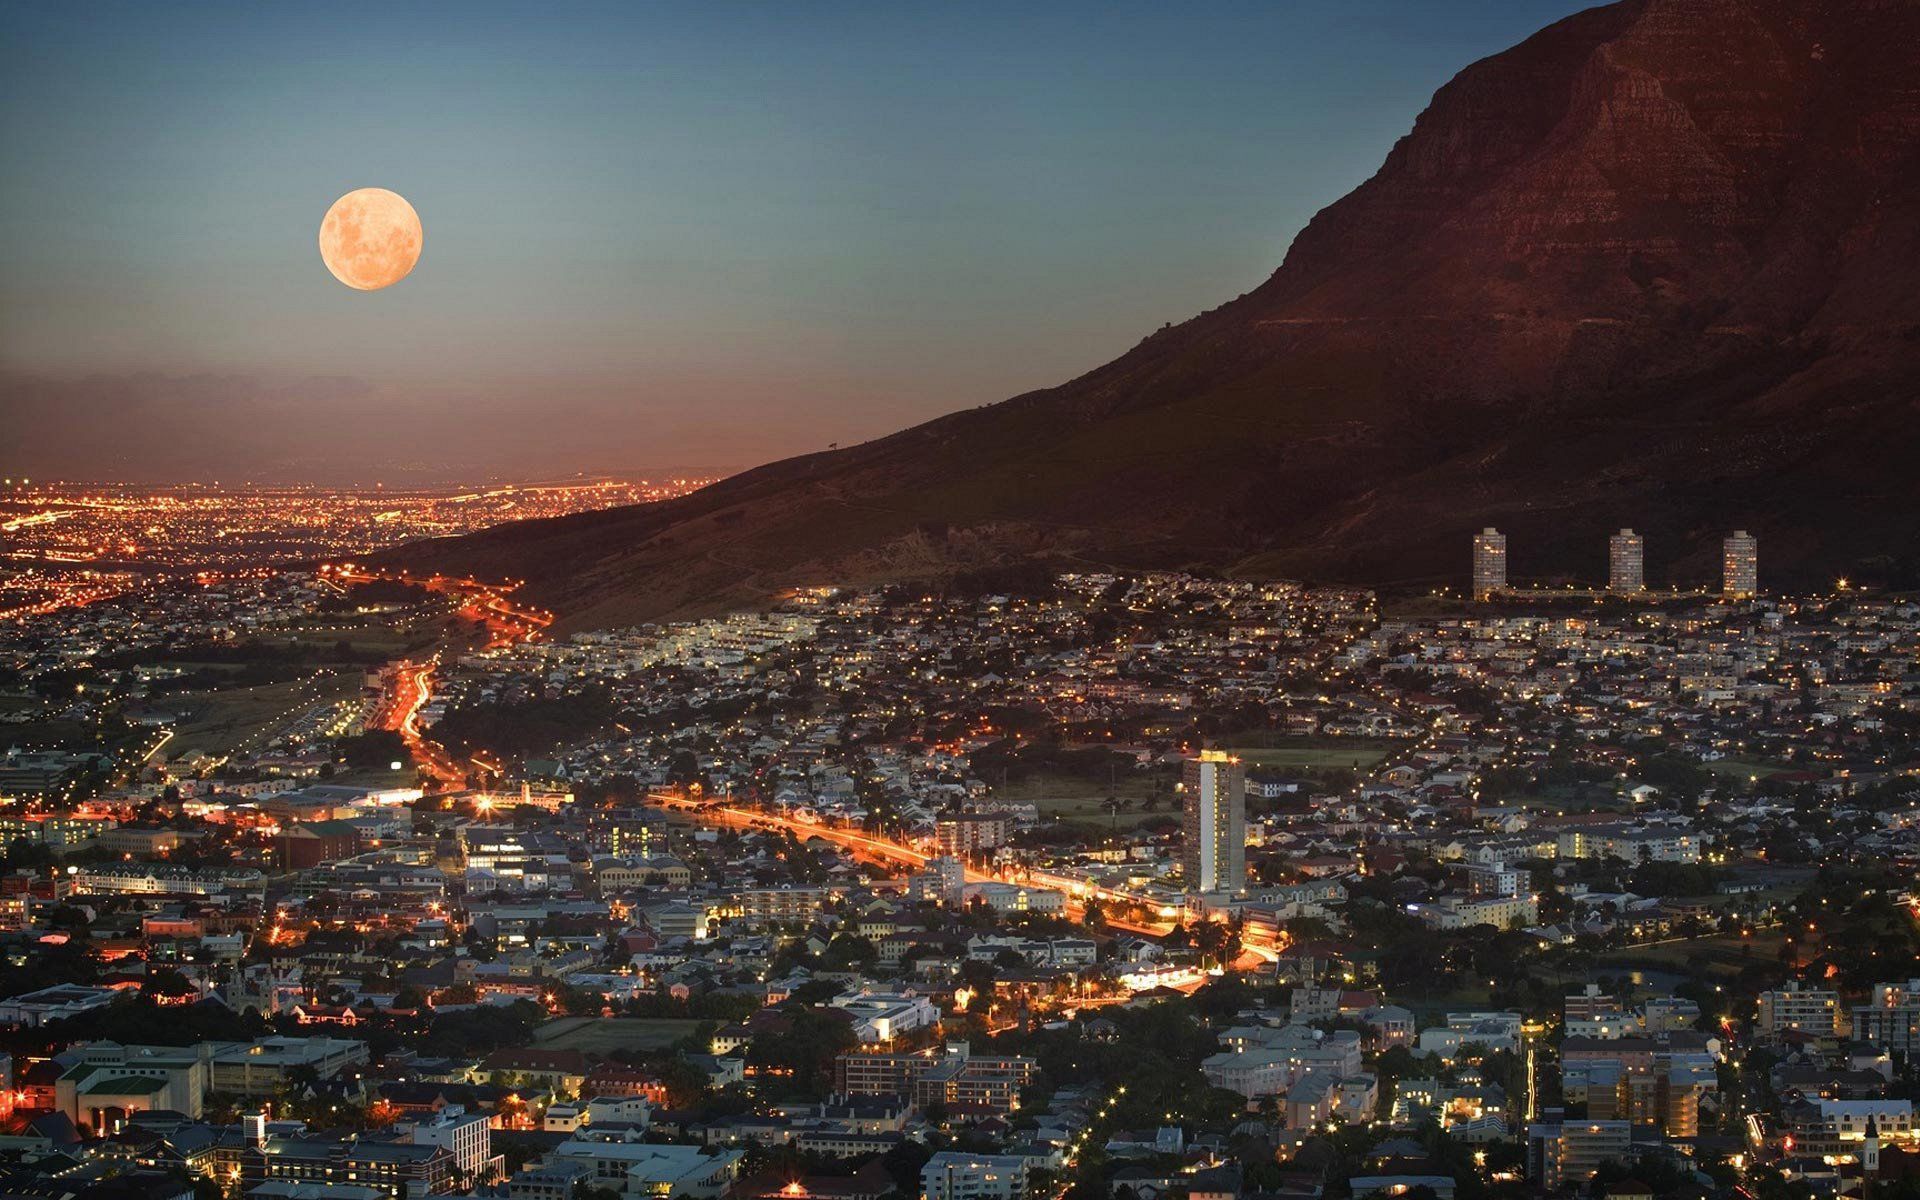 Wallpaper Cape Town With The Moon - 1920 x 1200 - Cities ...